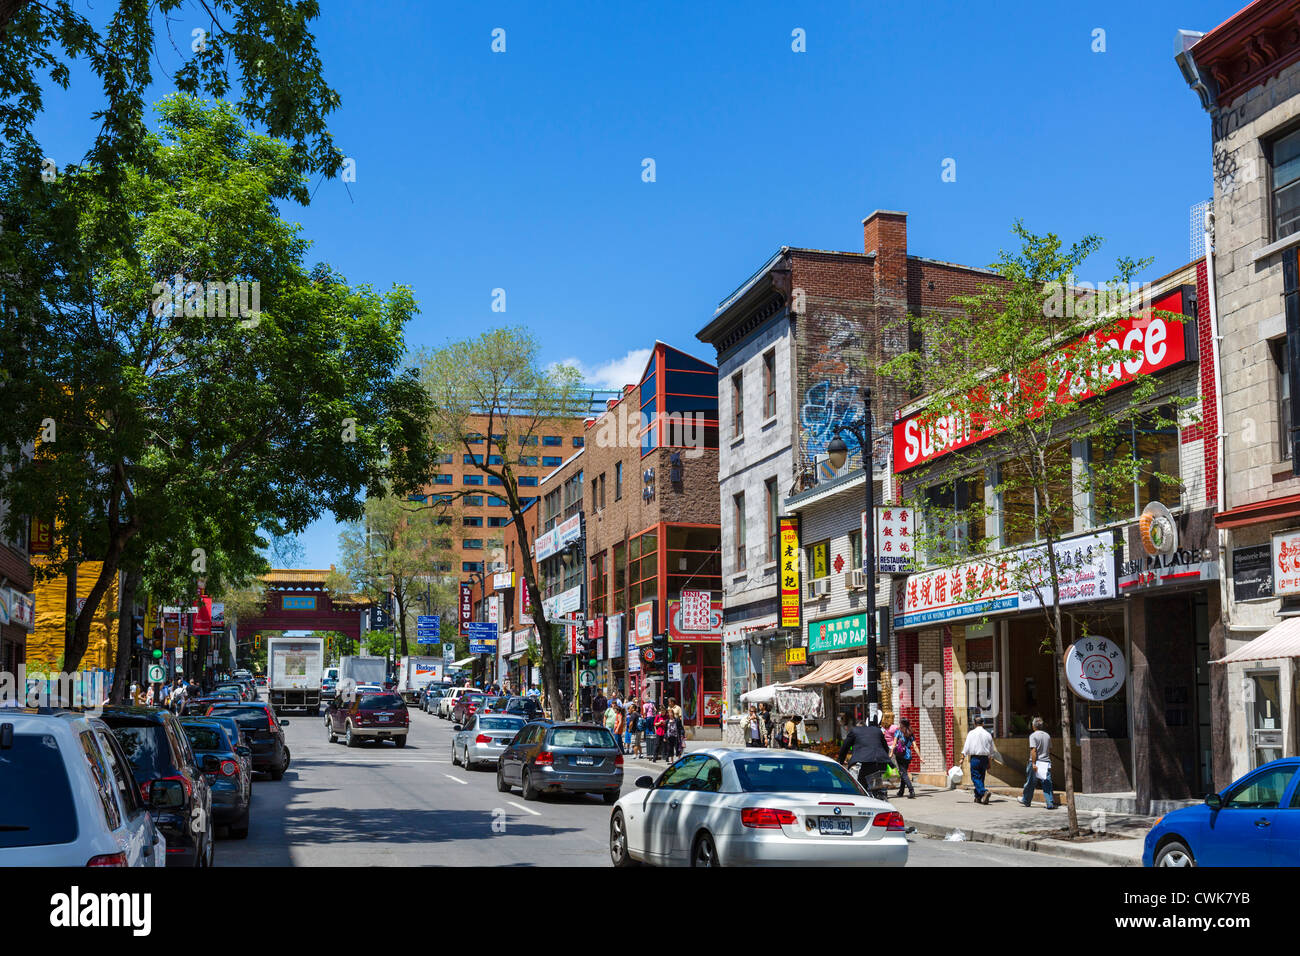 Shops and restaurants on Boulevard Saint-Laurent, Chinatown, Montreal, Quebec, Canada Stock Photo